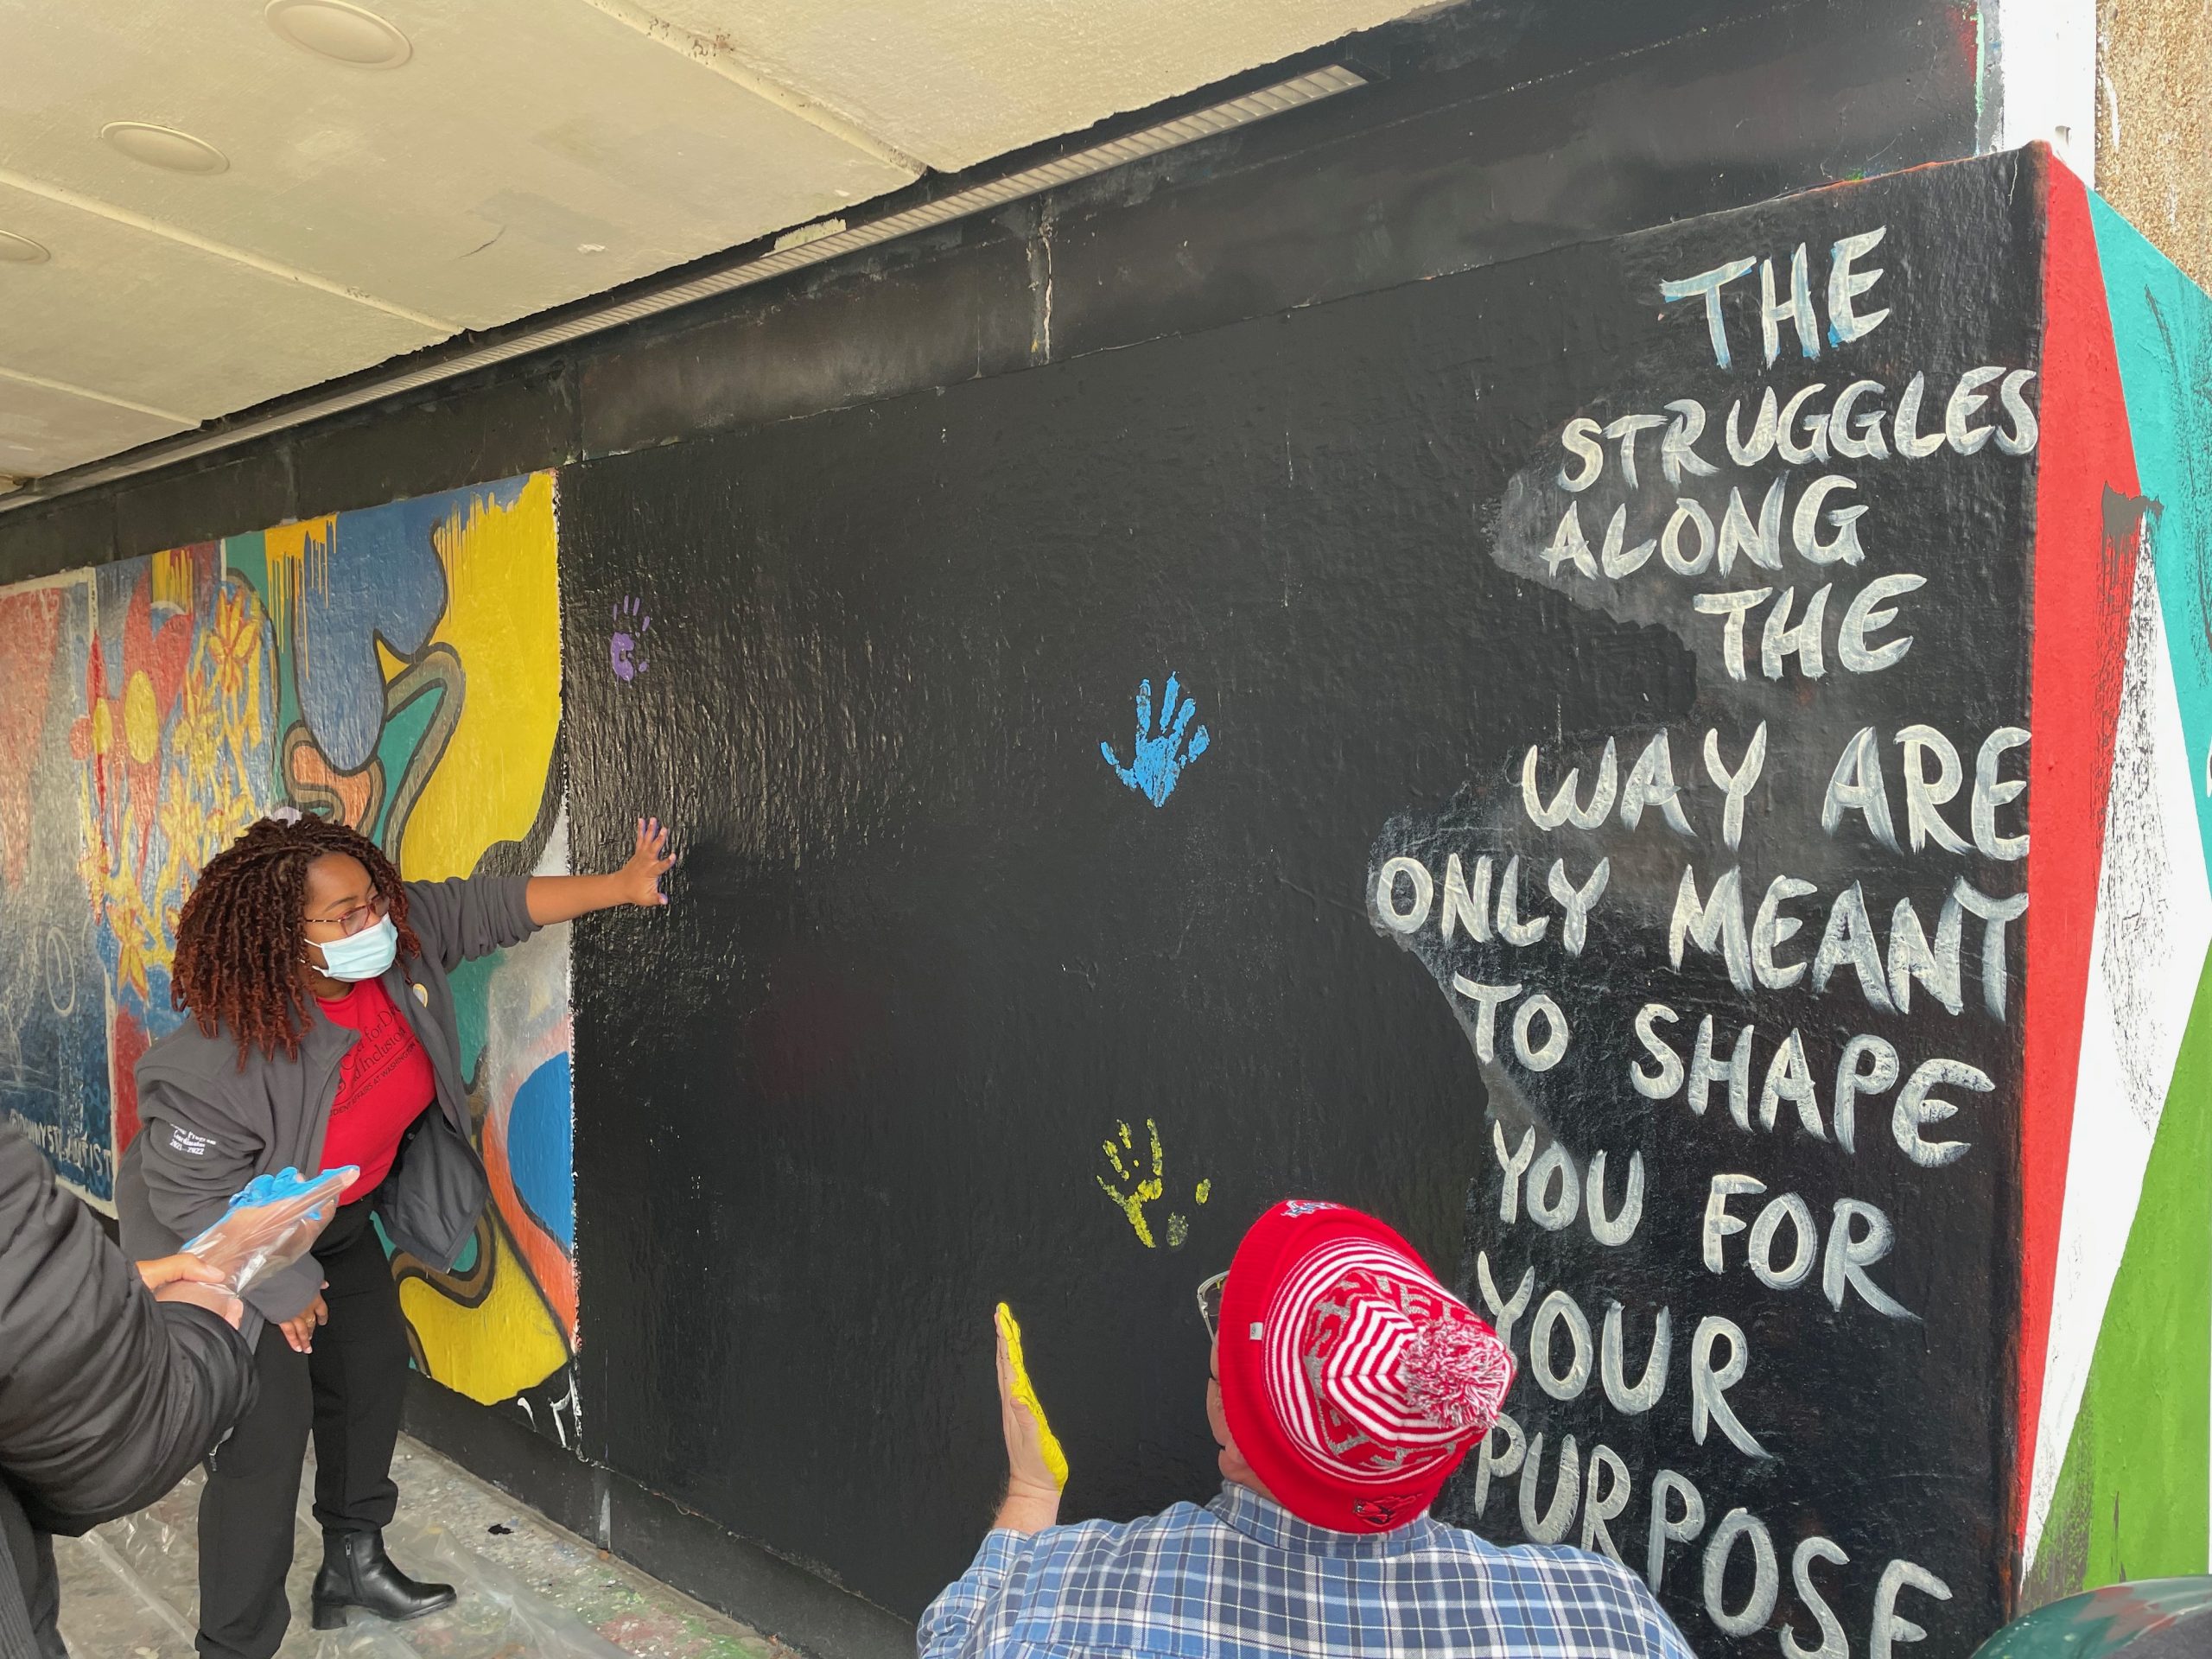 A woman in a gray jacket and red shirt places her hand on a black mural panel, where there are handprints in blue and yellow.